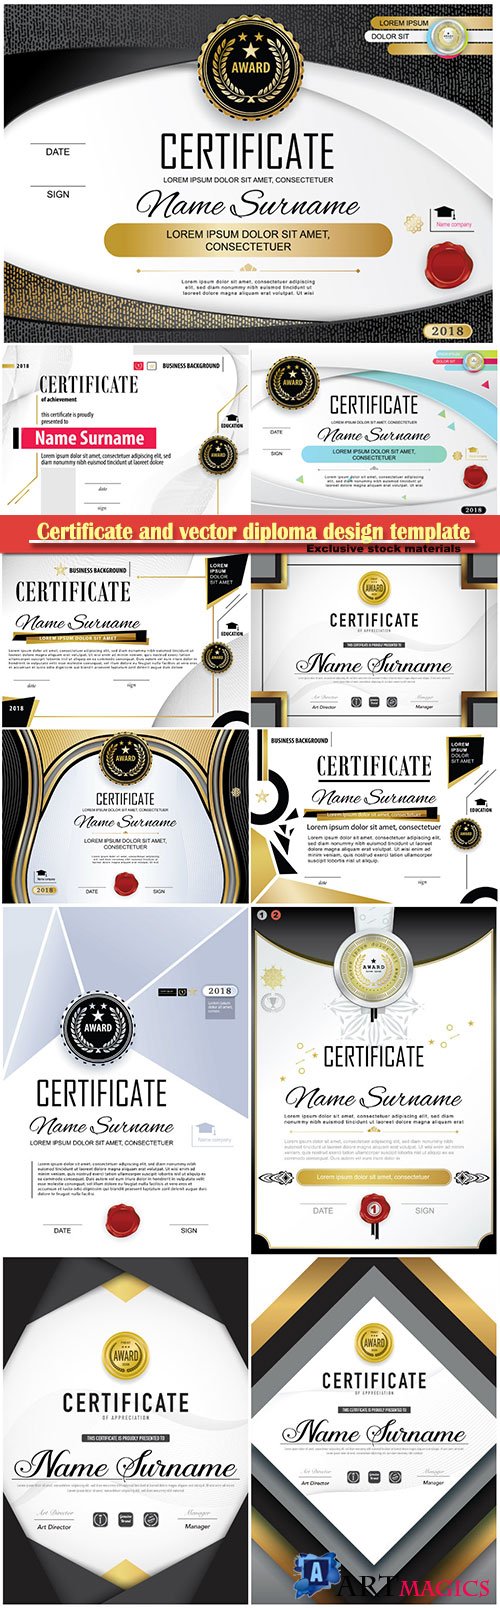 Certificate and vector diploma design template # 53